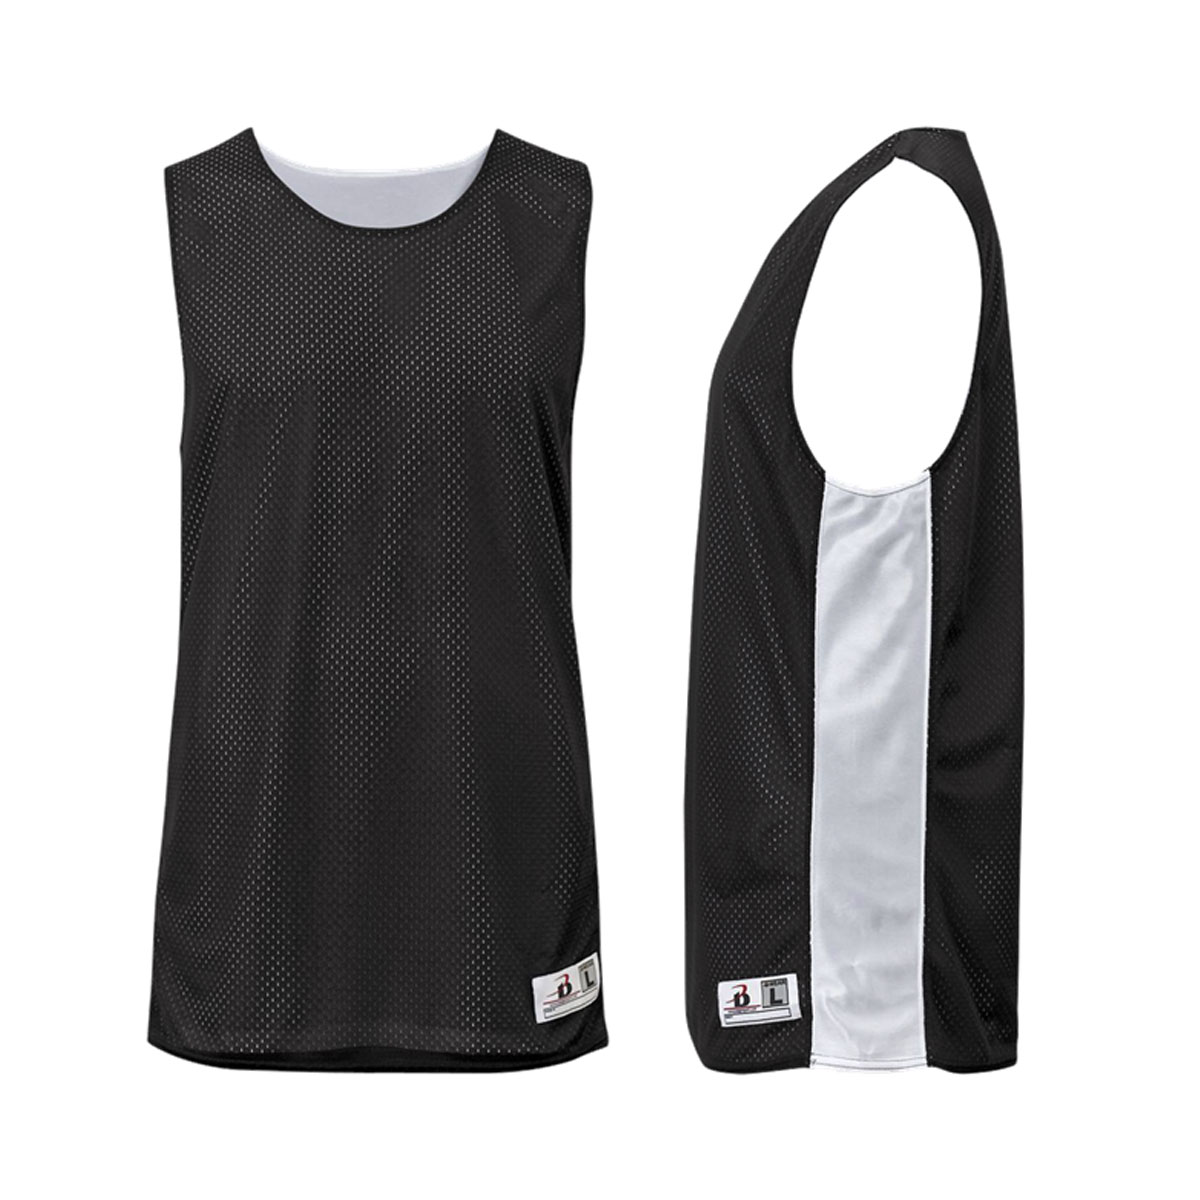 Youth M Reversible MESH TANK TOP Basketball PRACTICE JERSEY Blank Solid 10-12 